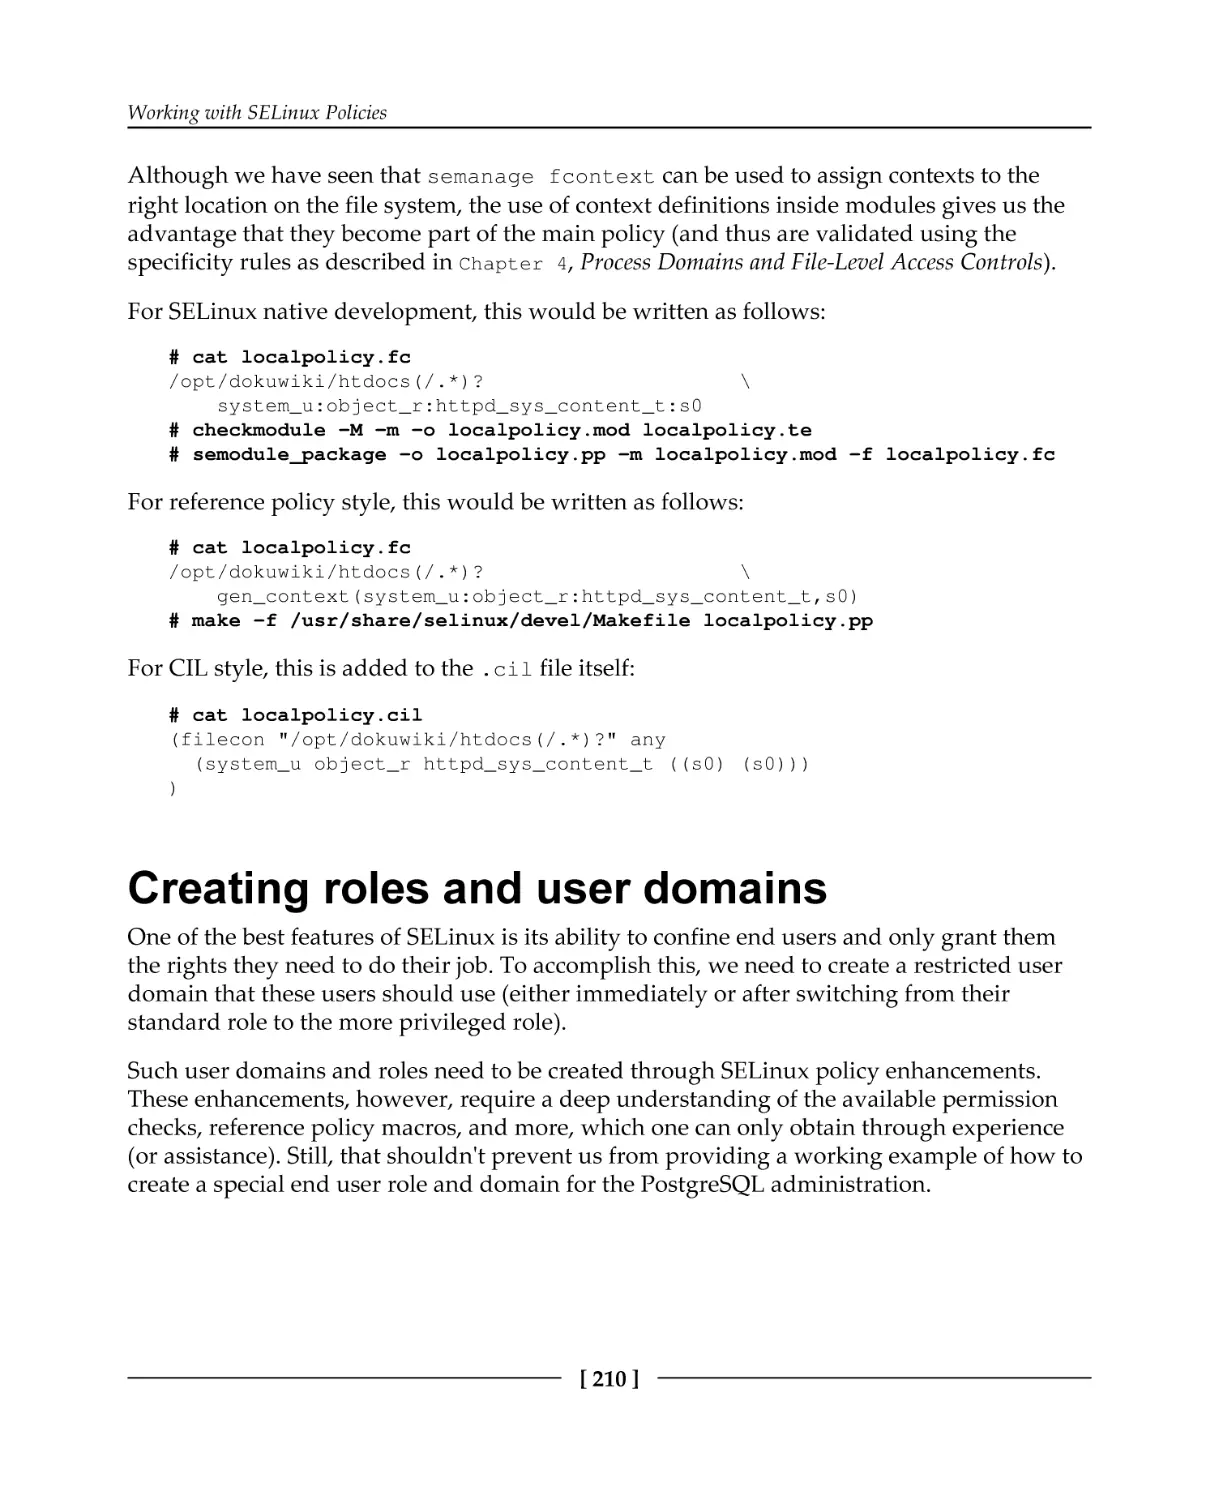 Creating roles and user domains